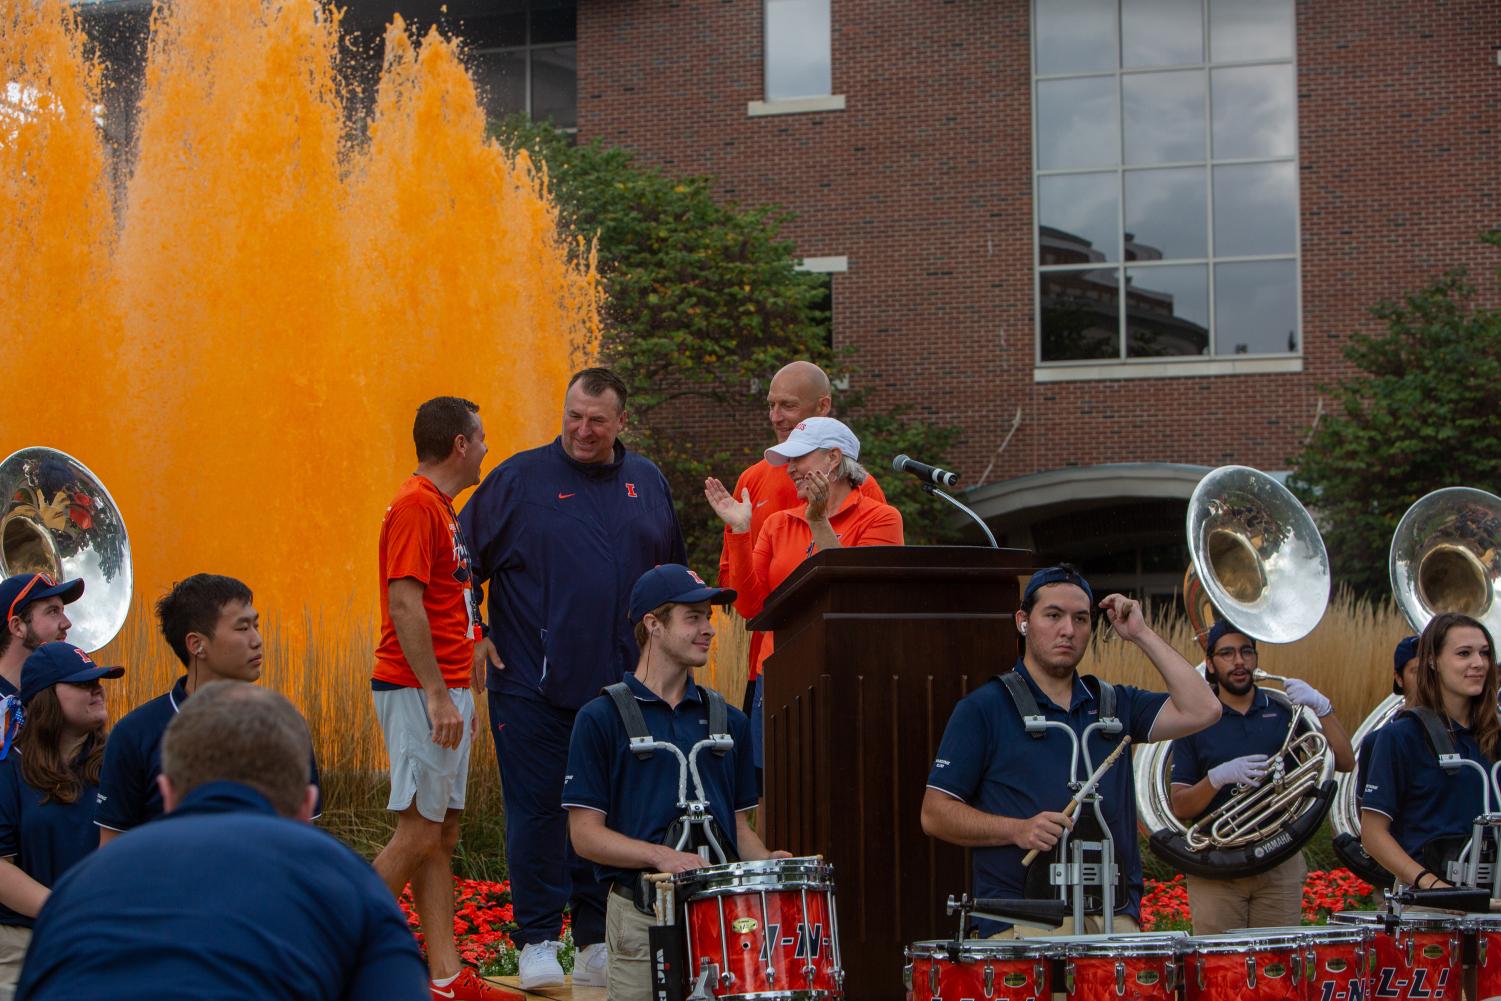 Downtown Champaign debuts Thursday Night Live, celebrates Homecoming with live music, art, more